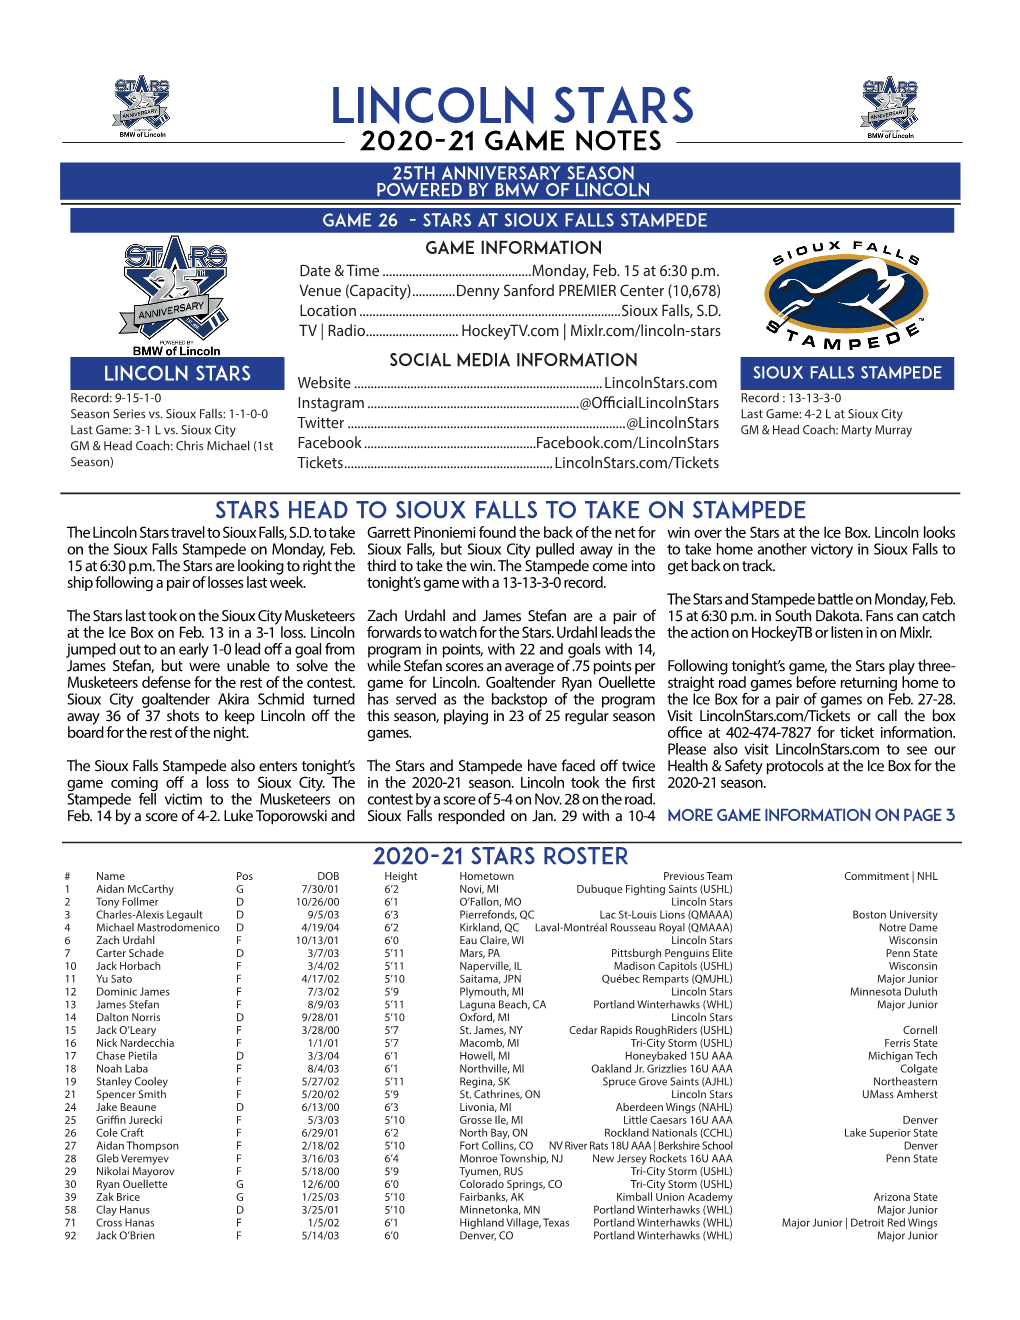 February 15Th @ Sioux Falls Game Notes